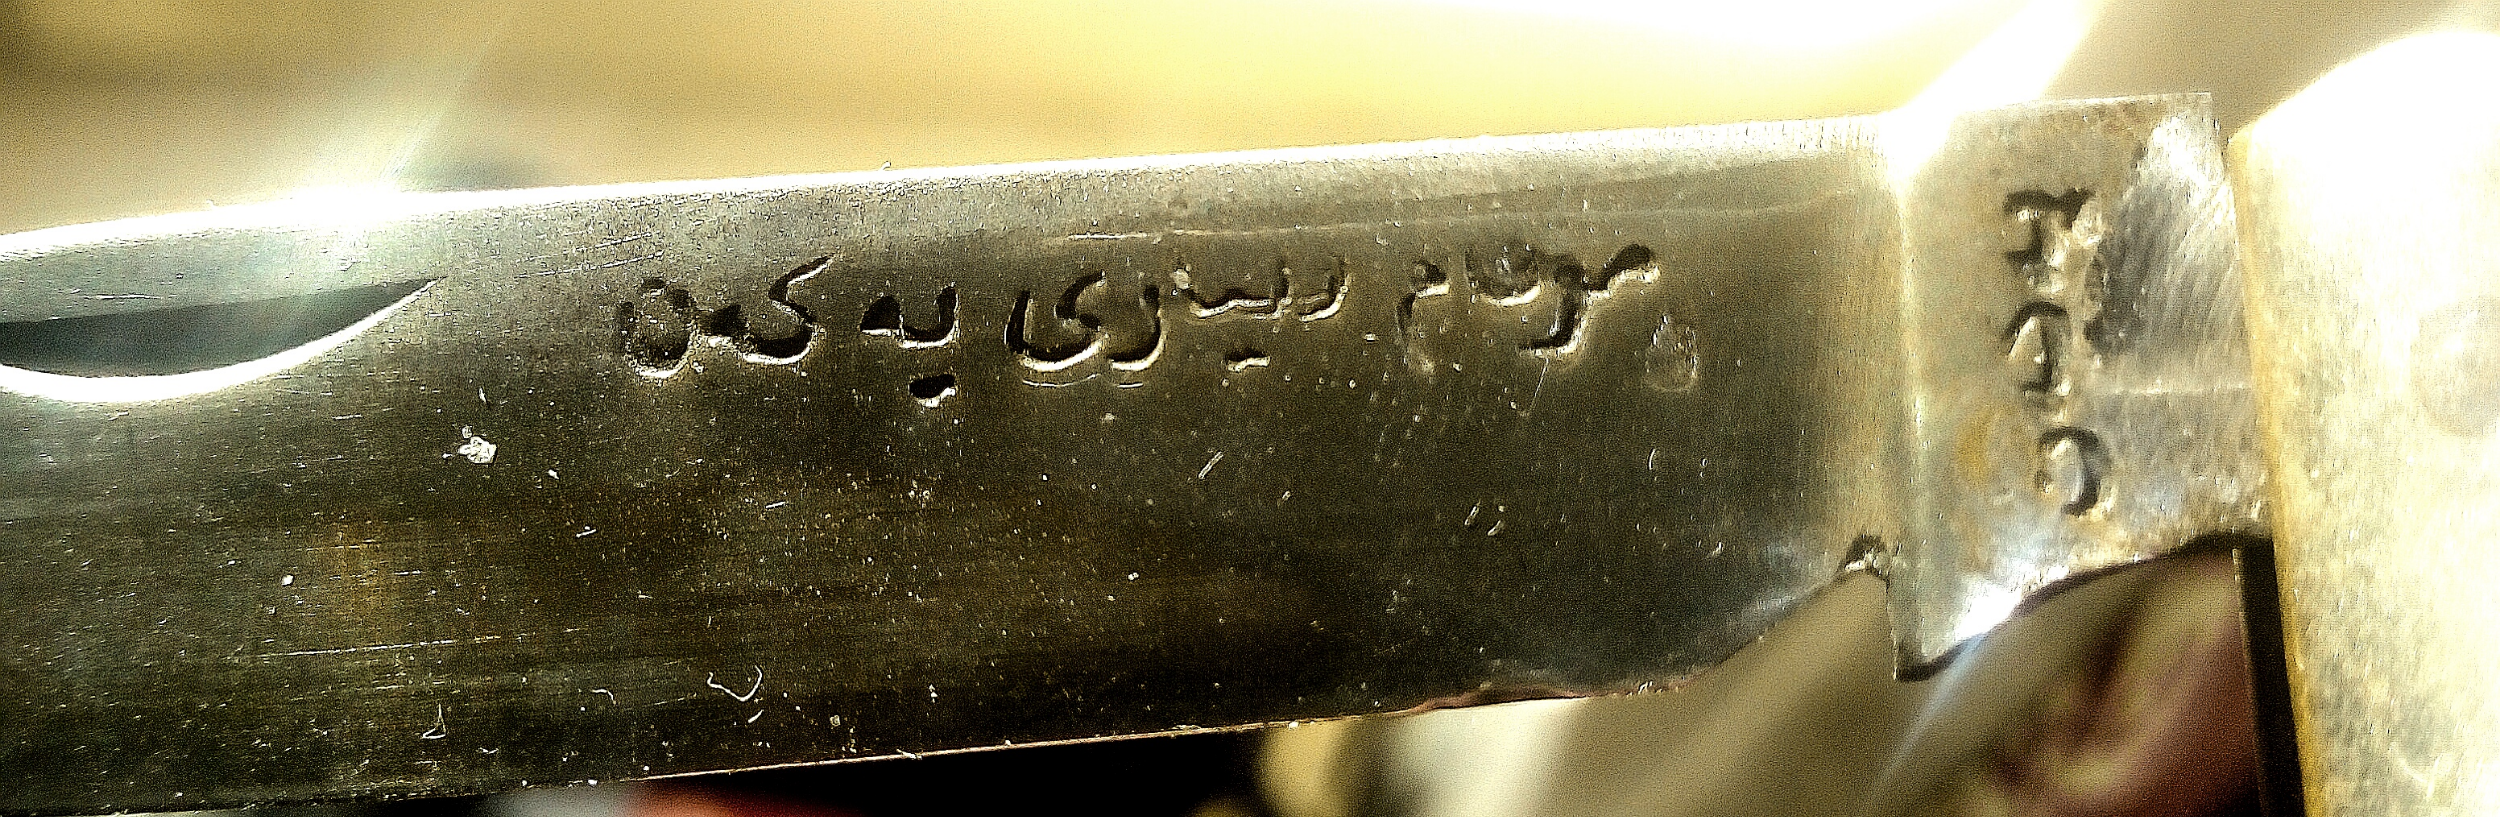 knife front view